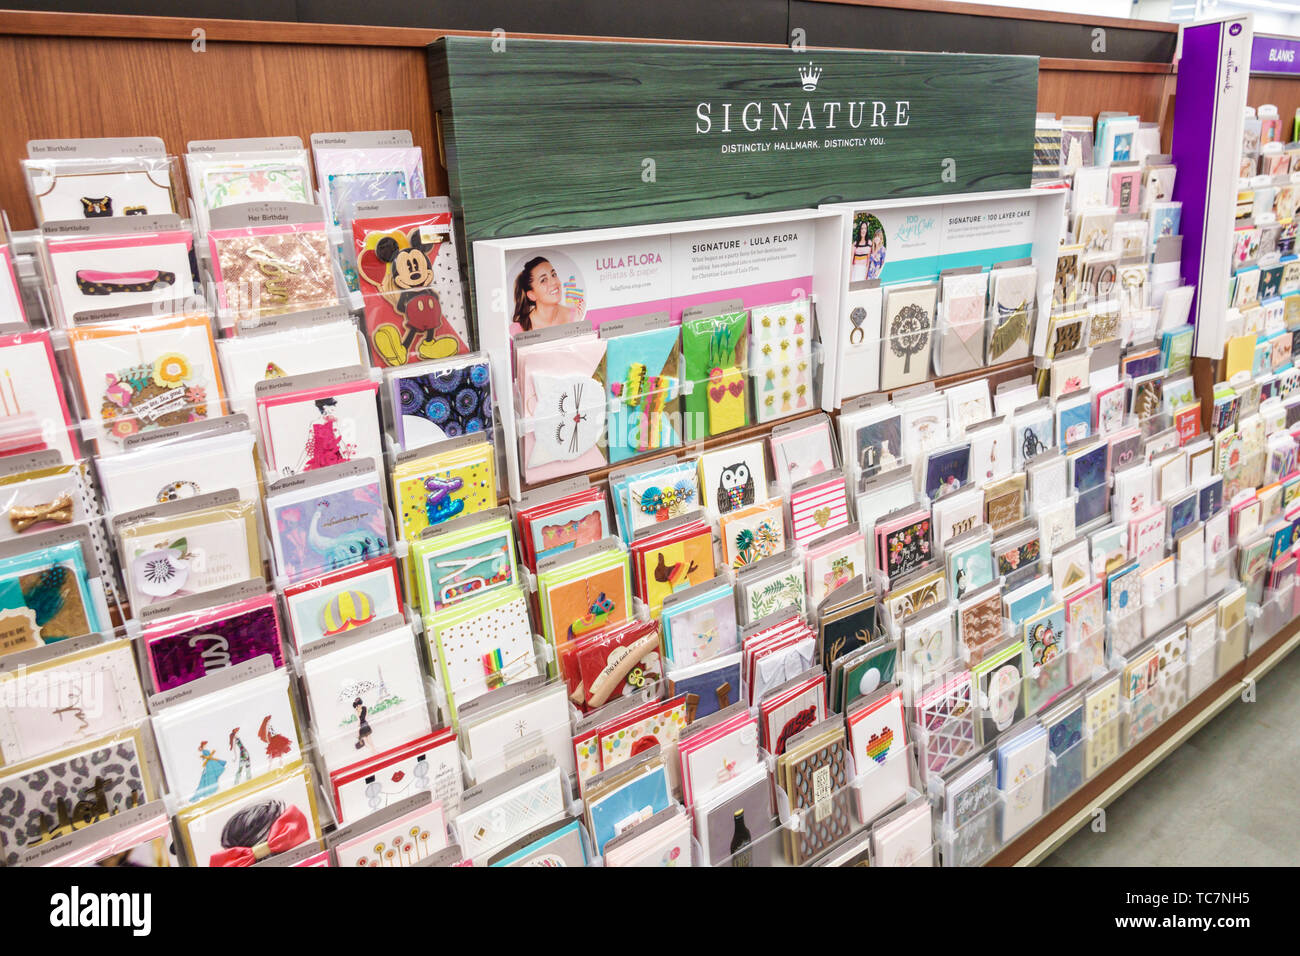 Hallmark Greeting Cards High Resolution Stock Photography And Images Alamy